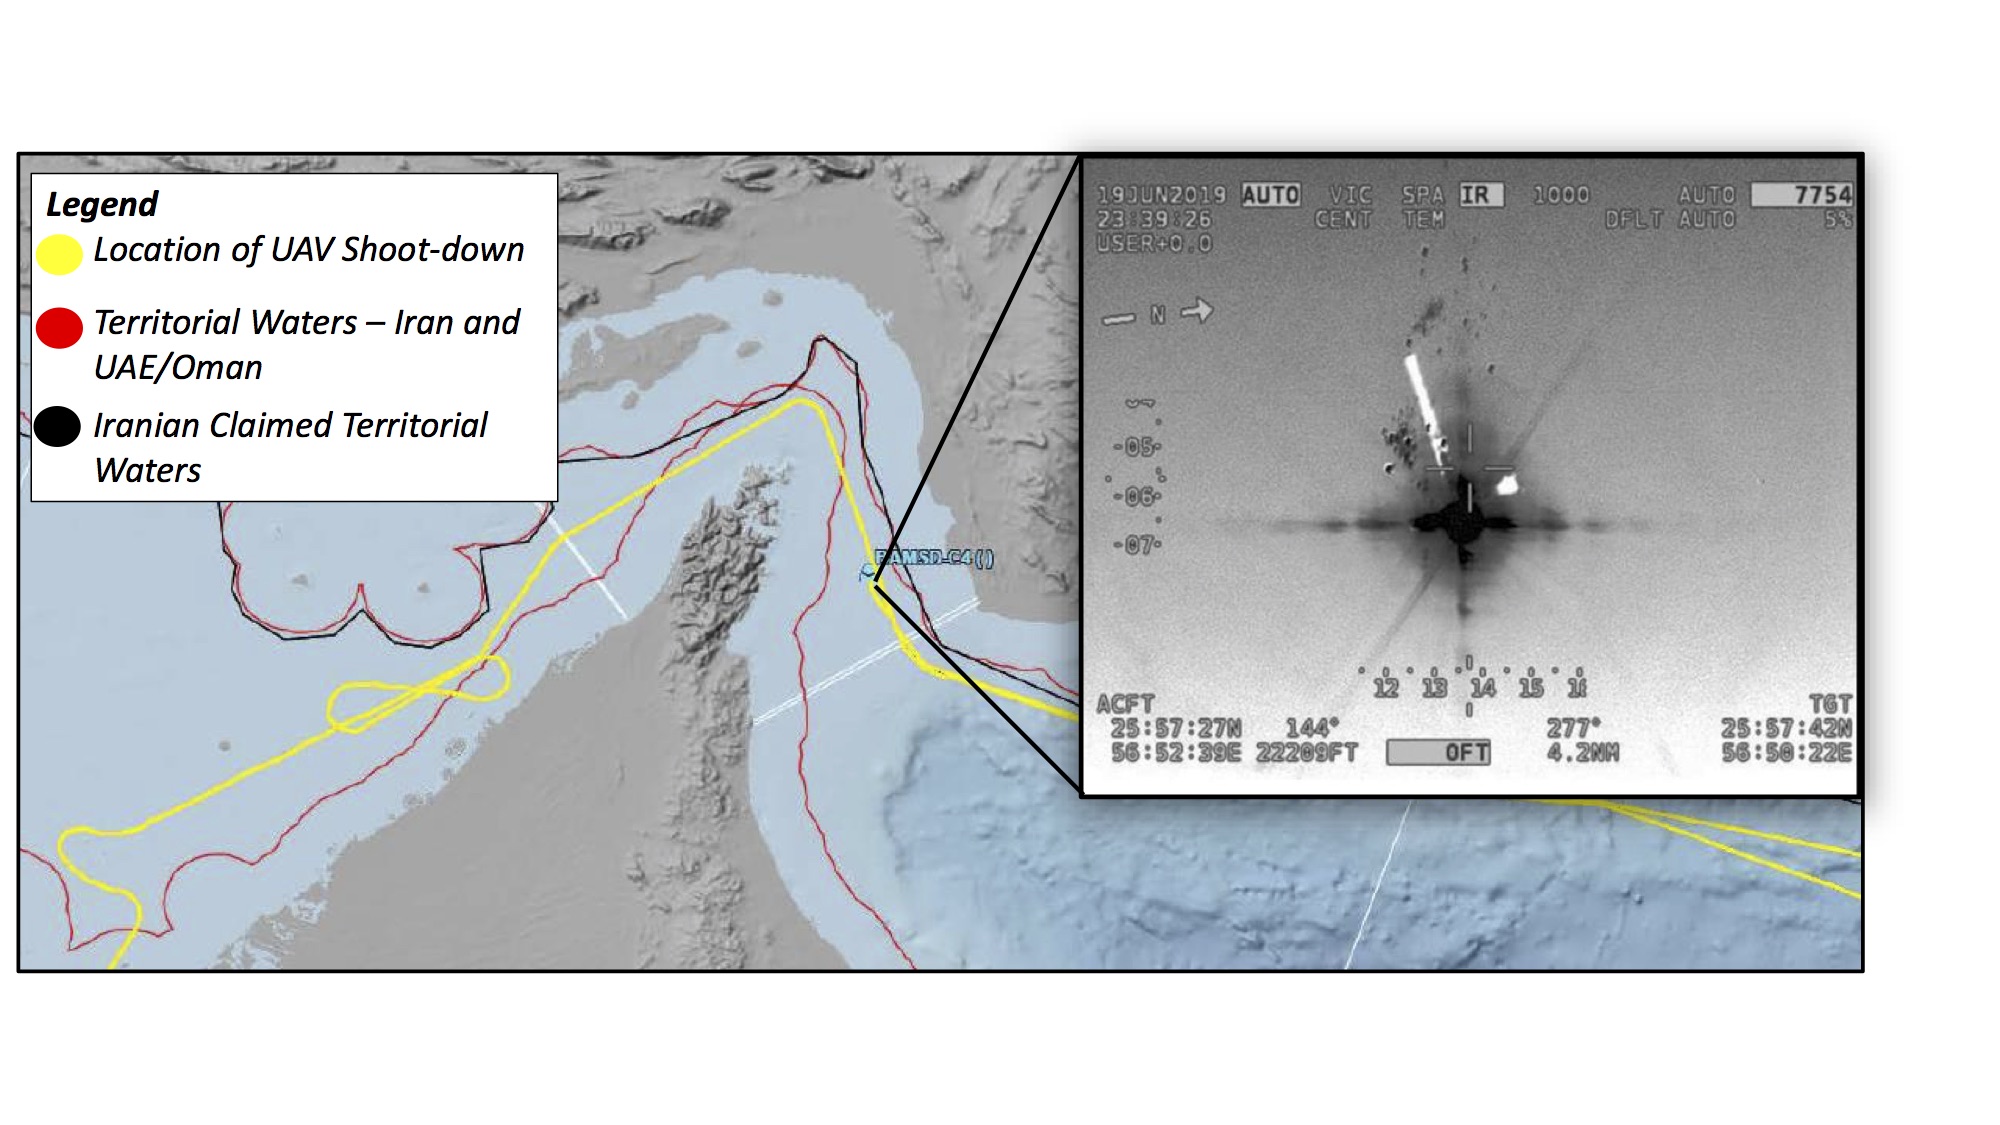 Graphic showing the flight path of the U.S. Navy RQ-4A shot down on June 20, 2019 (U.S. Central Command &mdash Twitter)